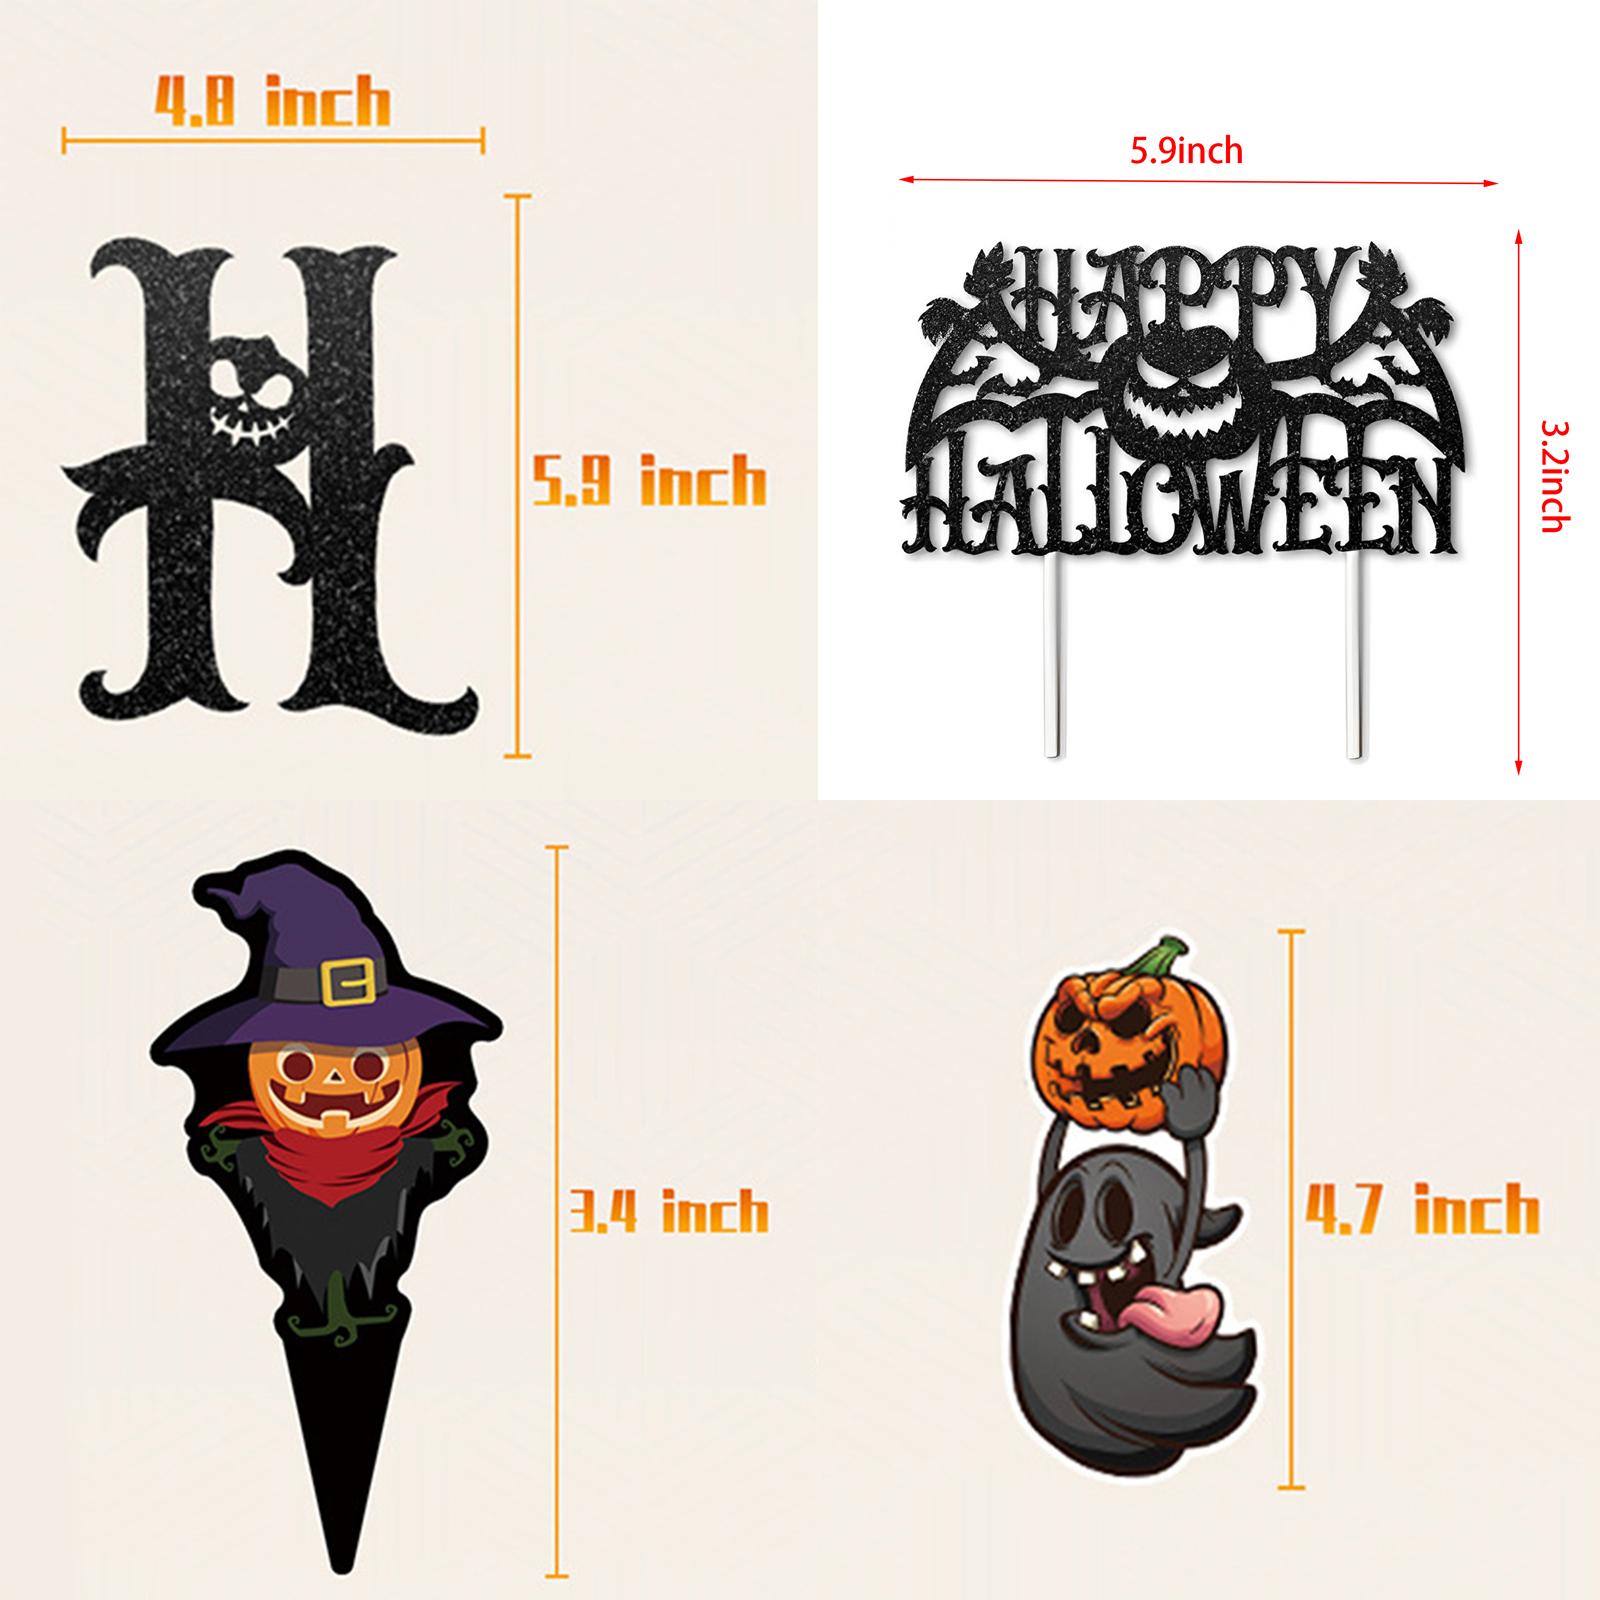 Halloween Party Decorations Set Ornaments for Ceiling Party Supplies Holiday